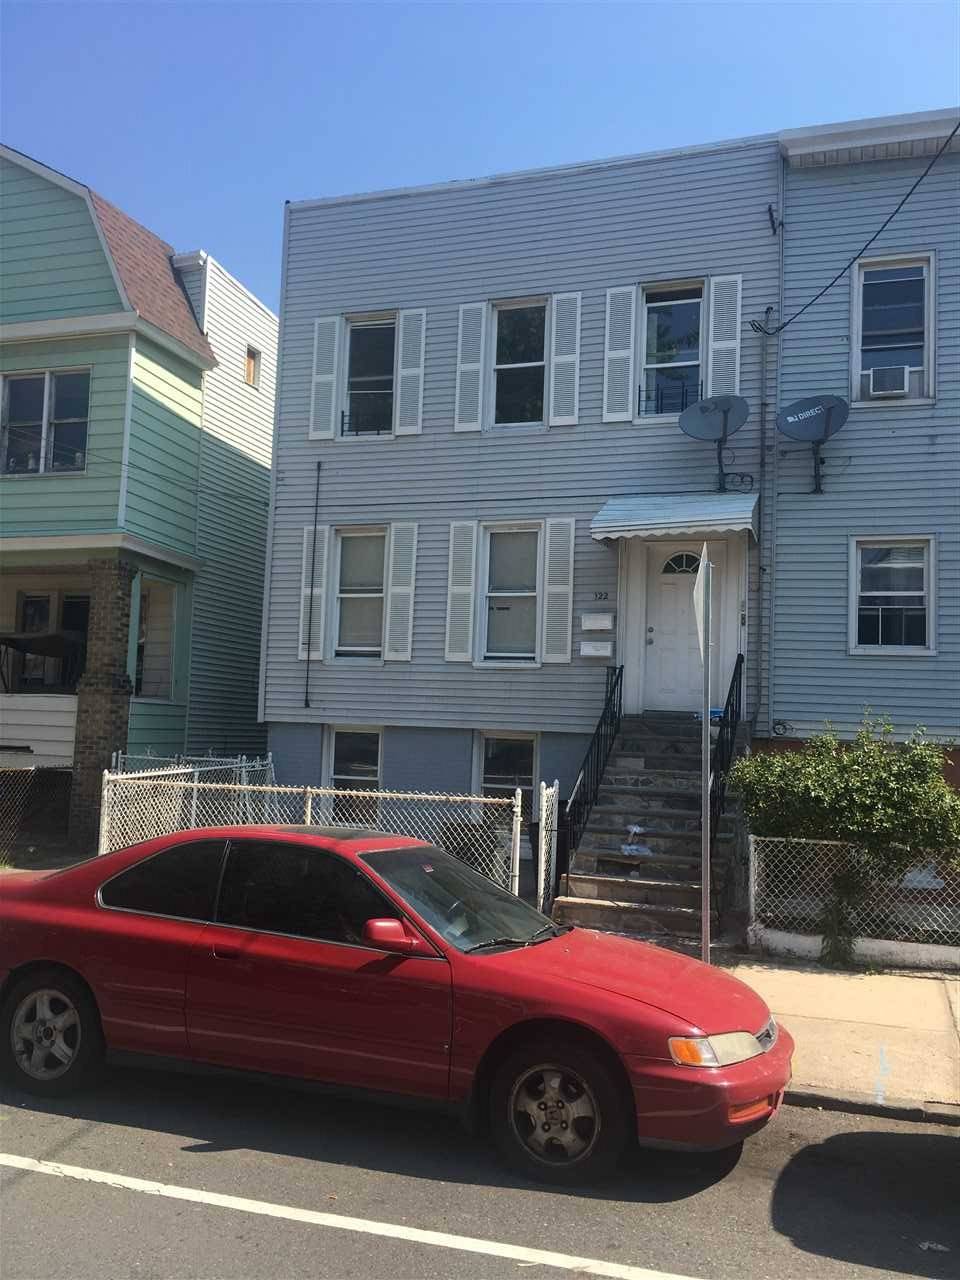 2 family in nice condition - Multi-Family New Jersey